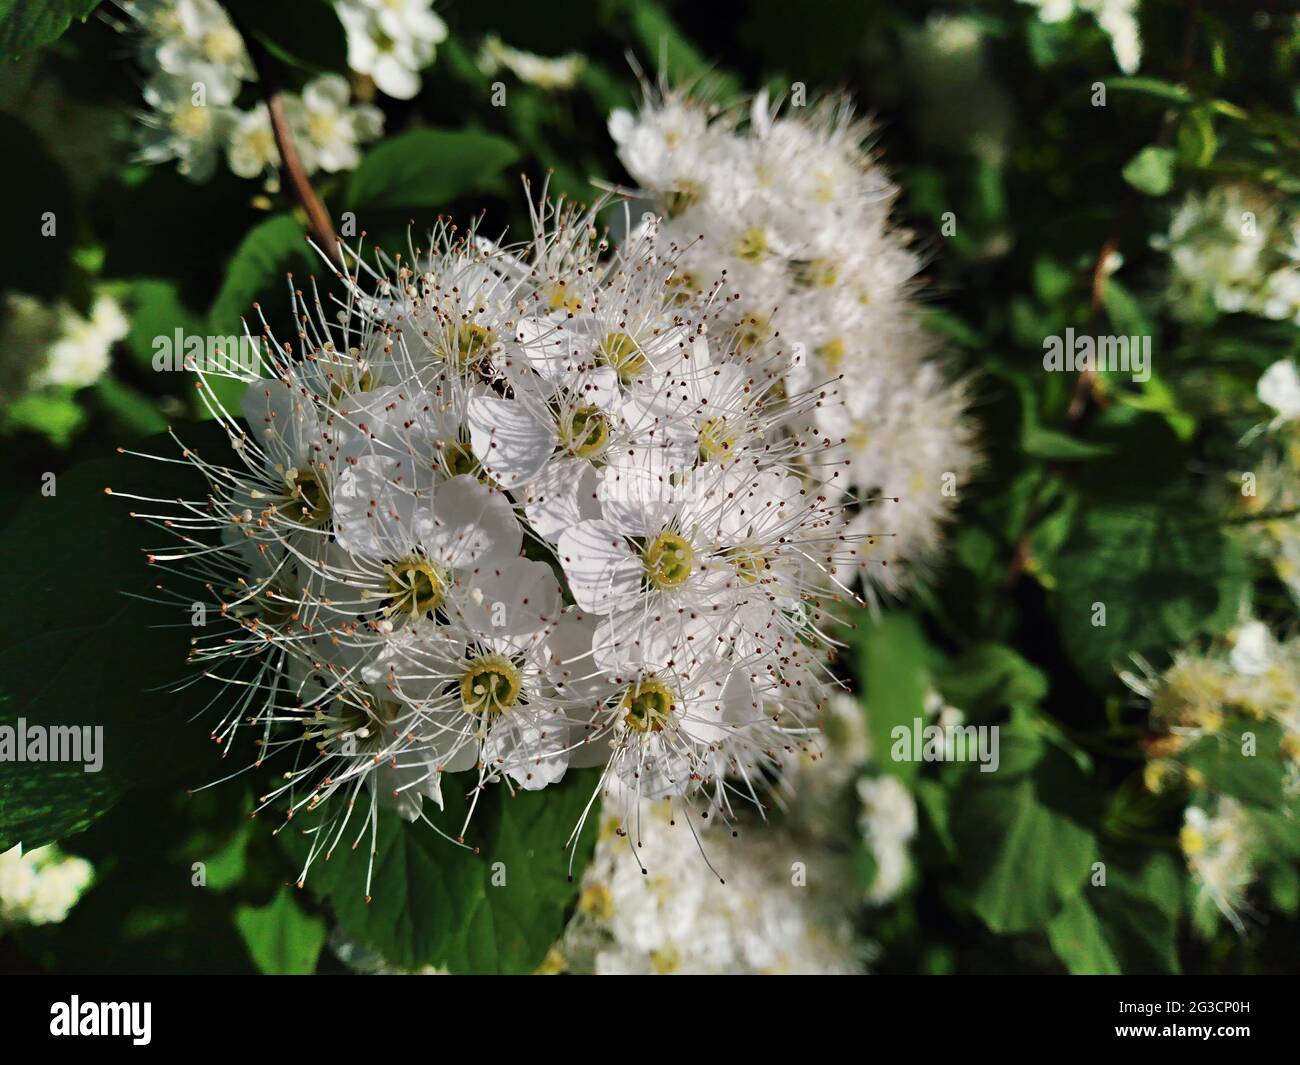 White flowers of the blossoming spirea chamaedryfolia bush, closeup view. Spring time. Stock Photo